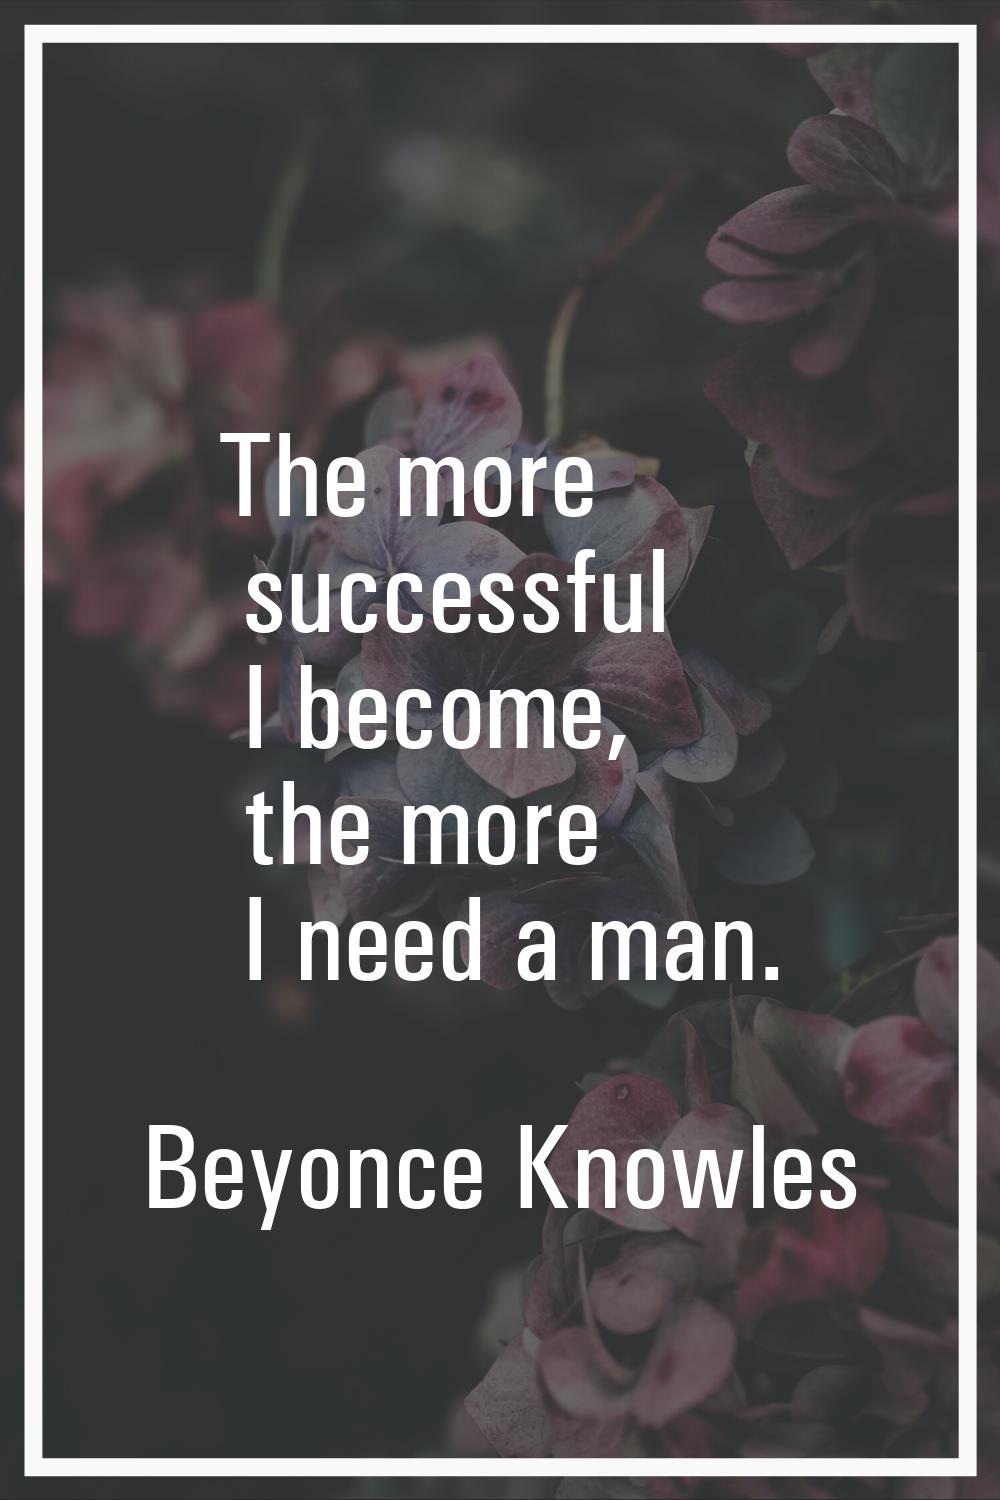 The more successful I become, the more I need a man.